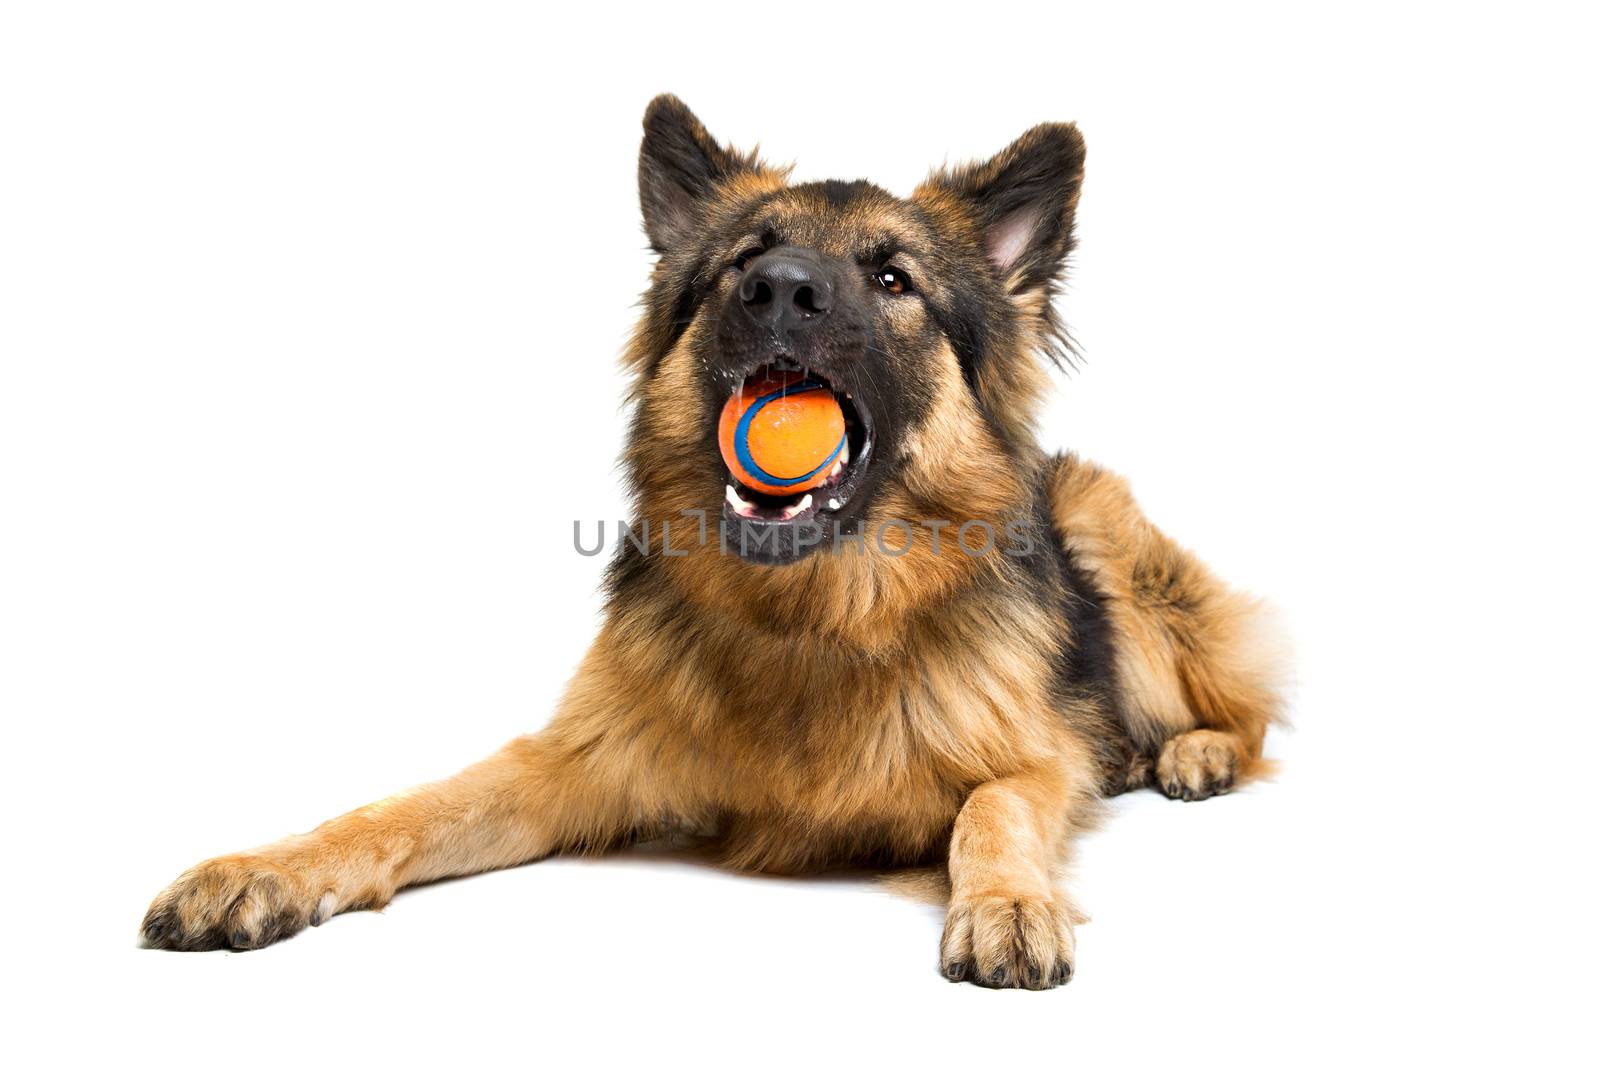 German shepherd chewing an orange ball in front of a white background